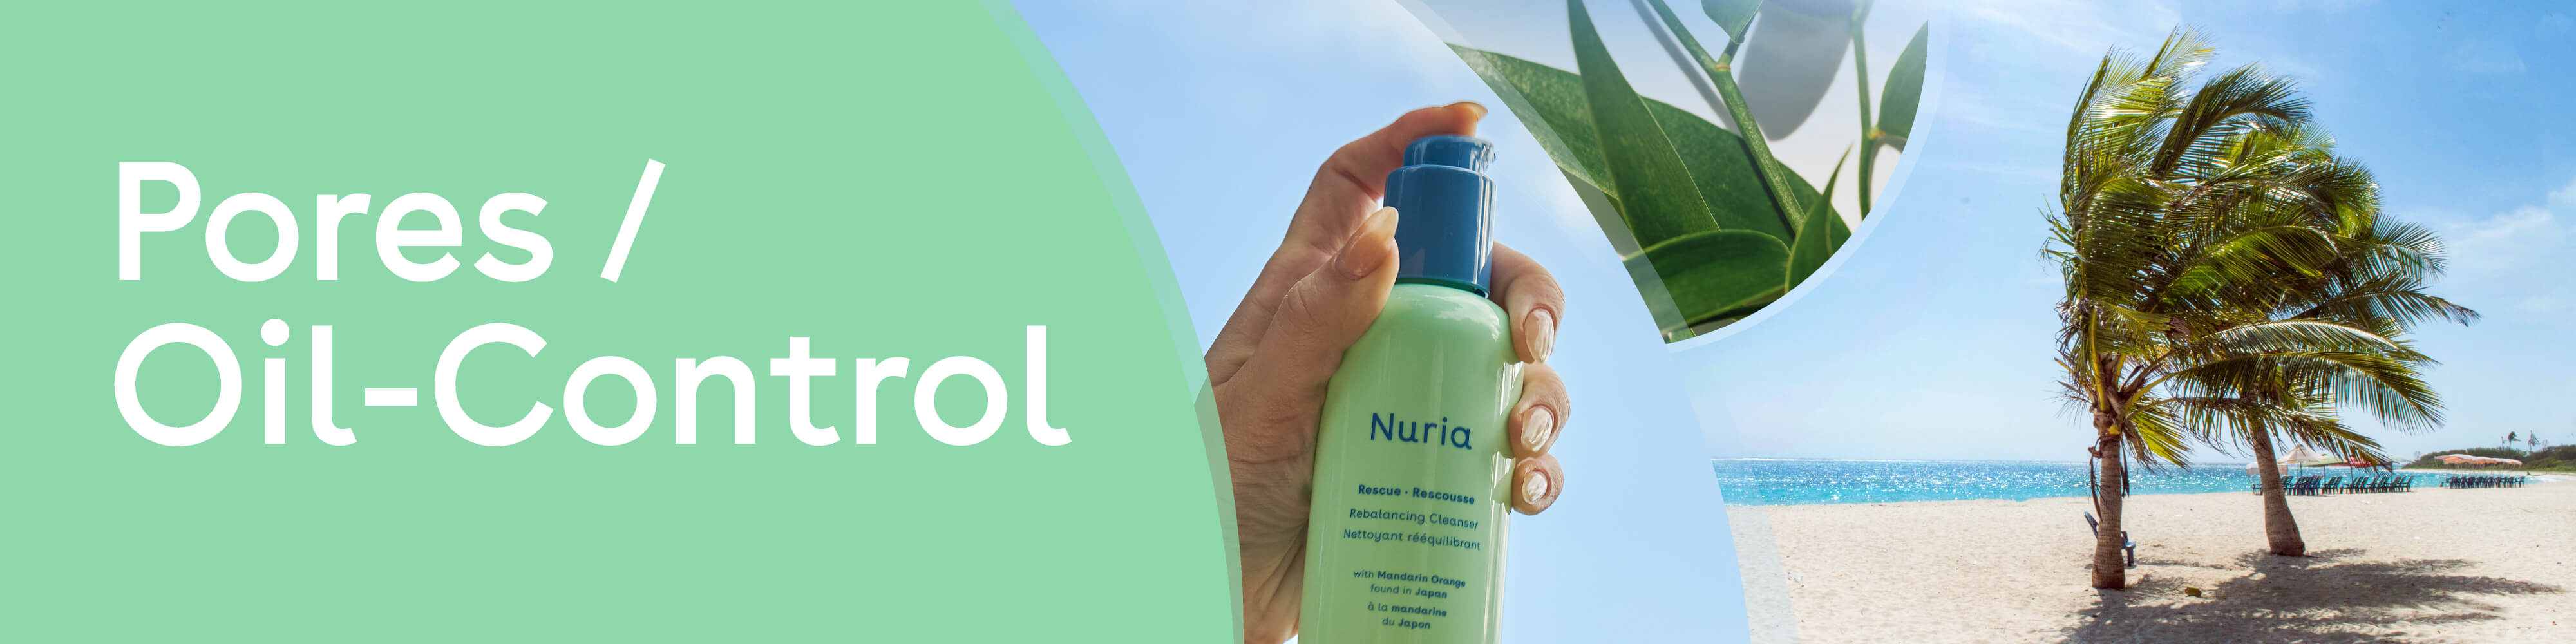 Pores / Oil Control - Nuria's products for your skin concerns